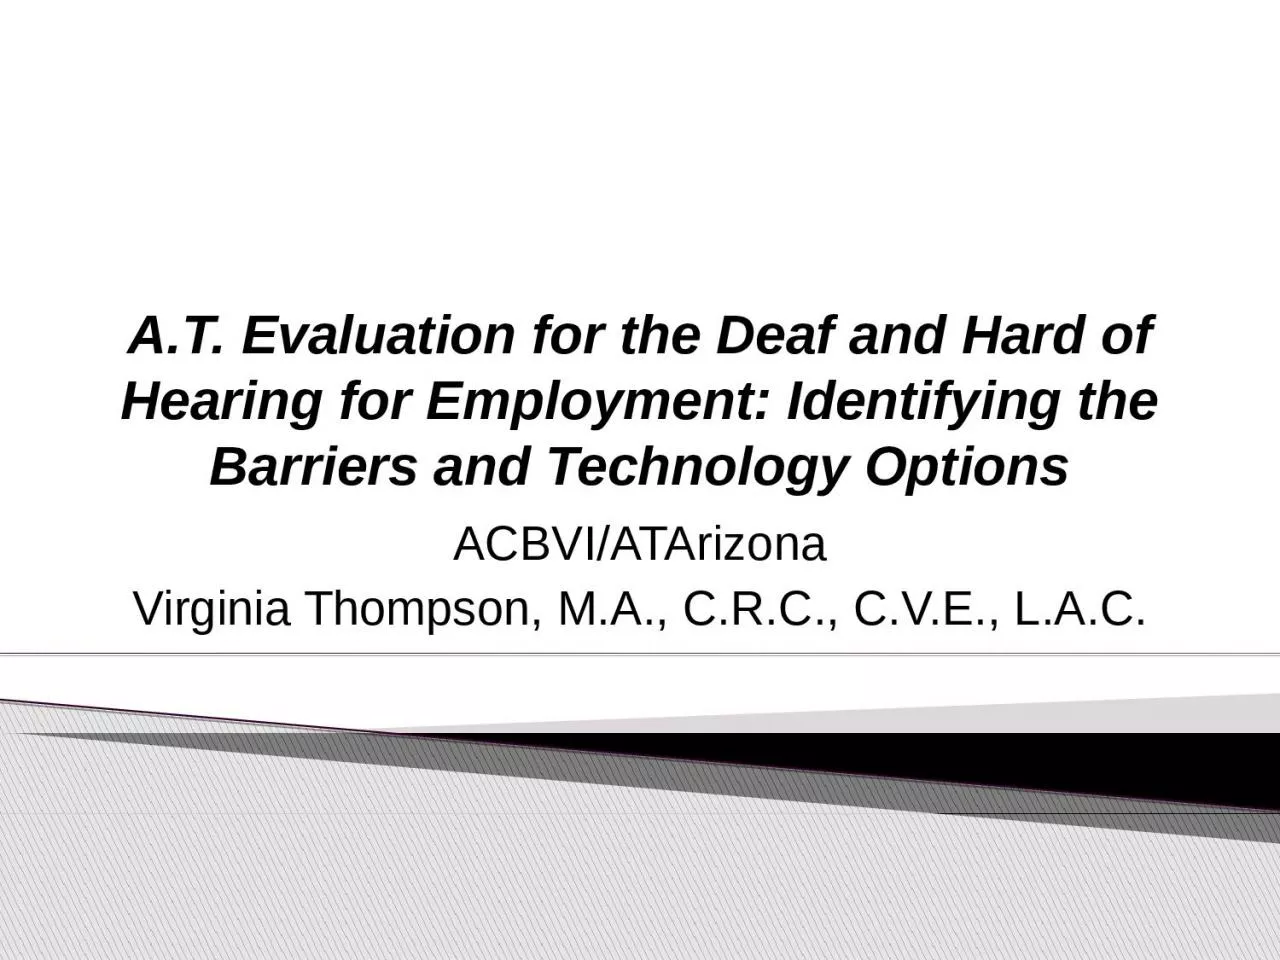 A.T. Evaluation for the Deaf and Hard of Hearing for Employment: Identifying the Barriers